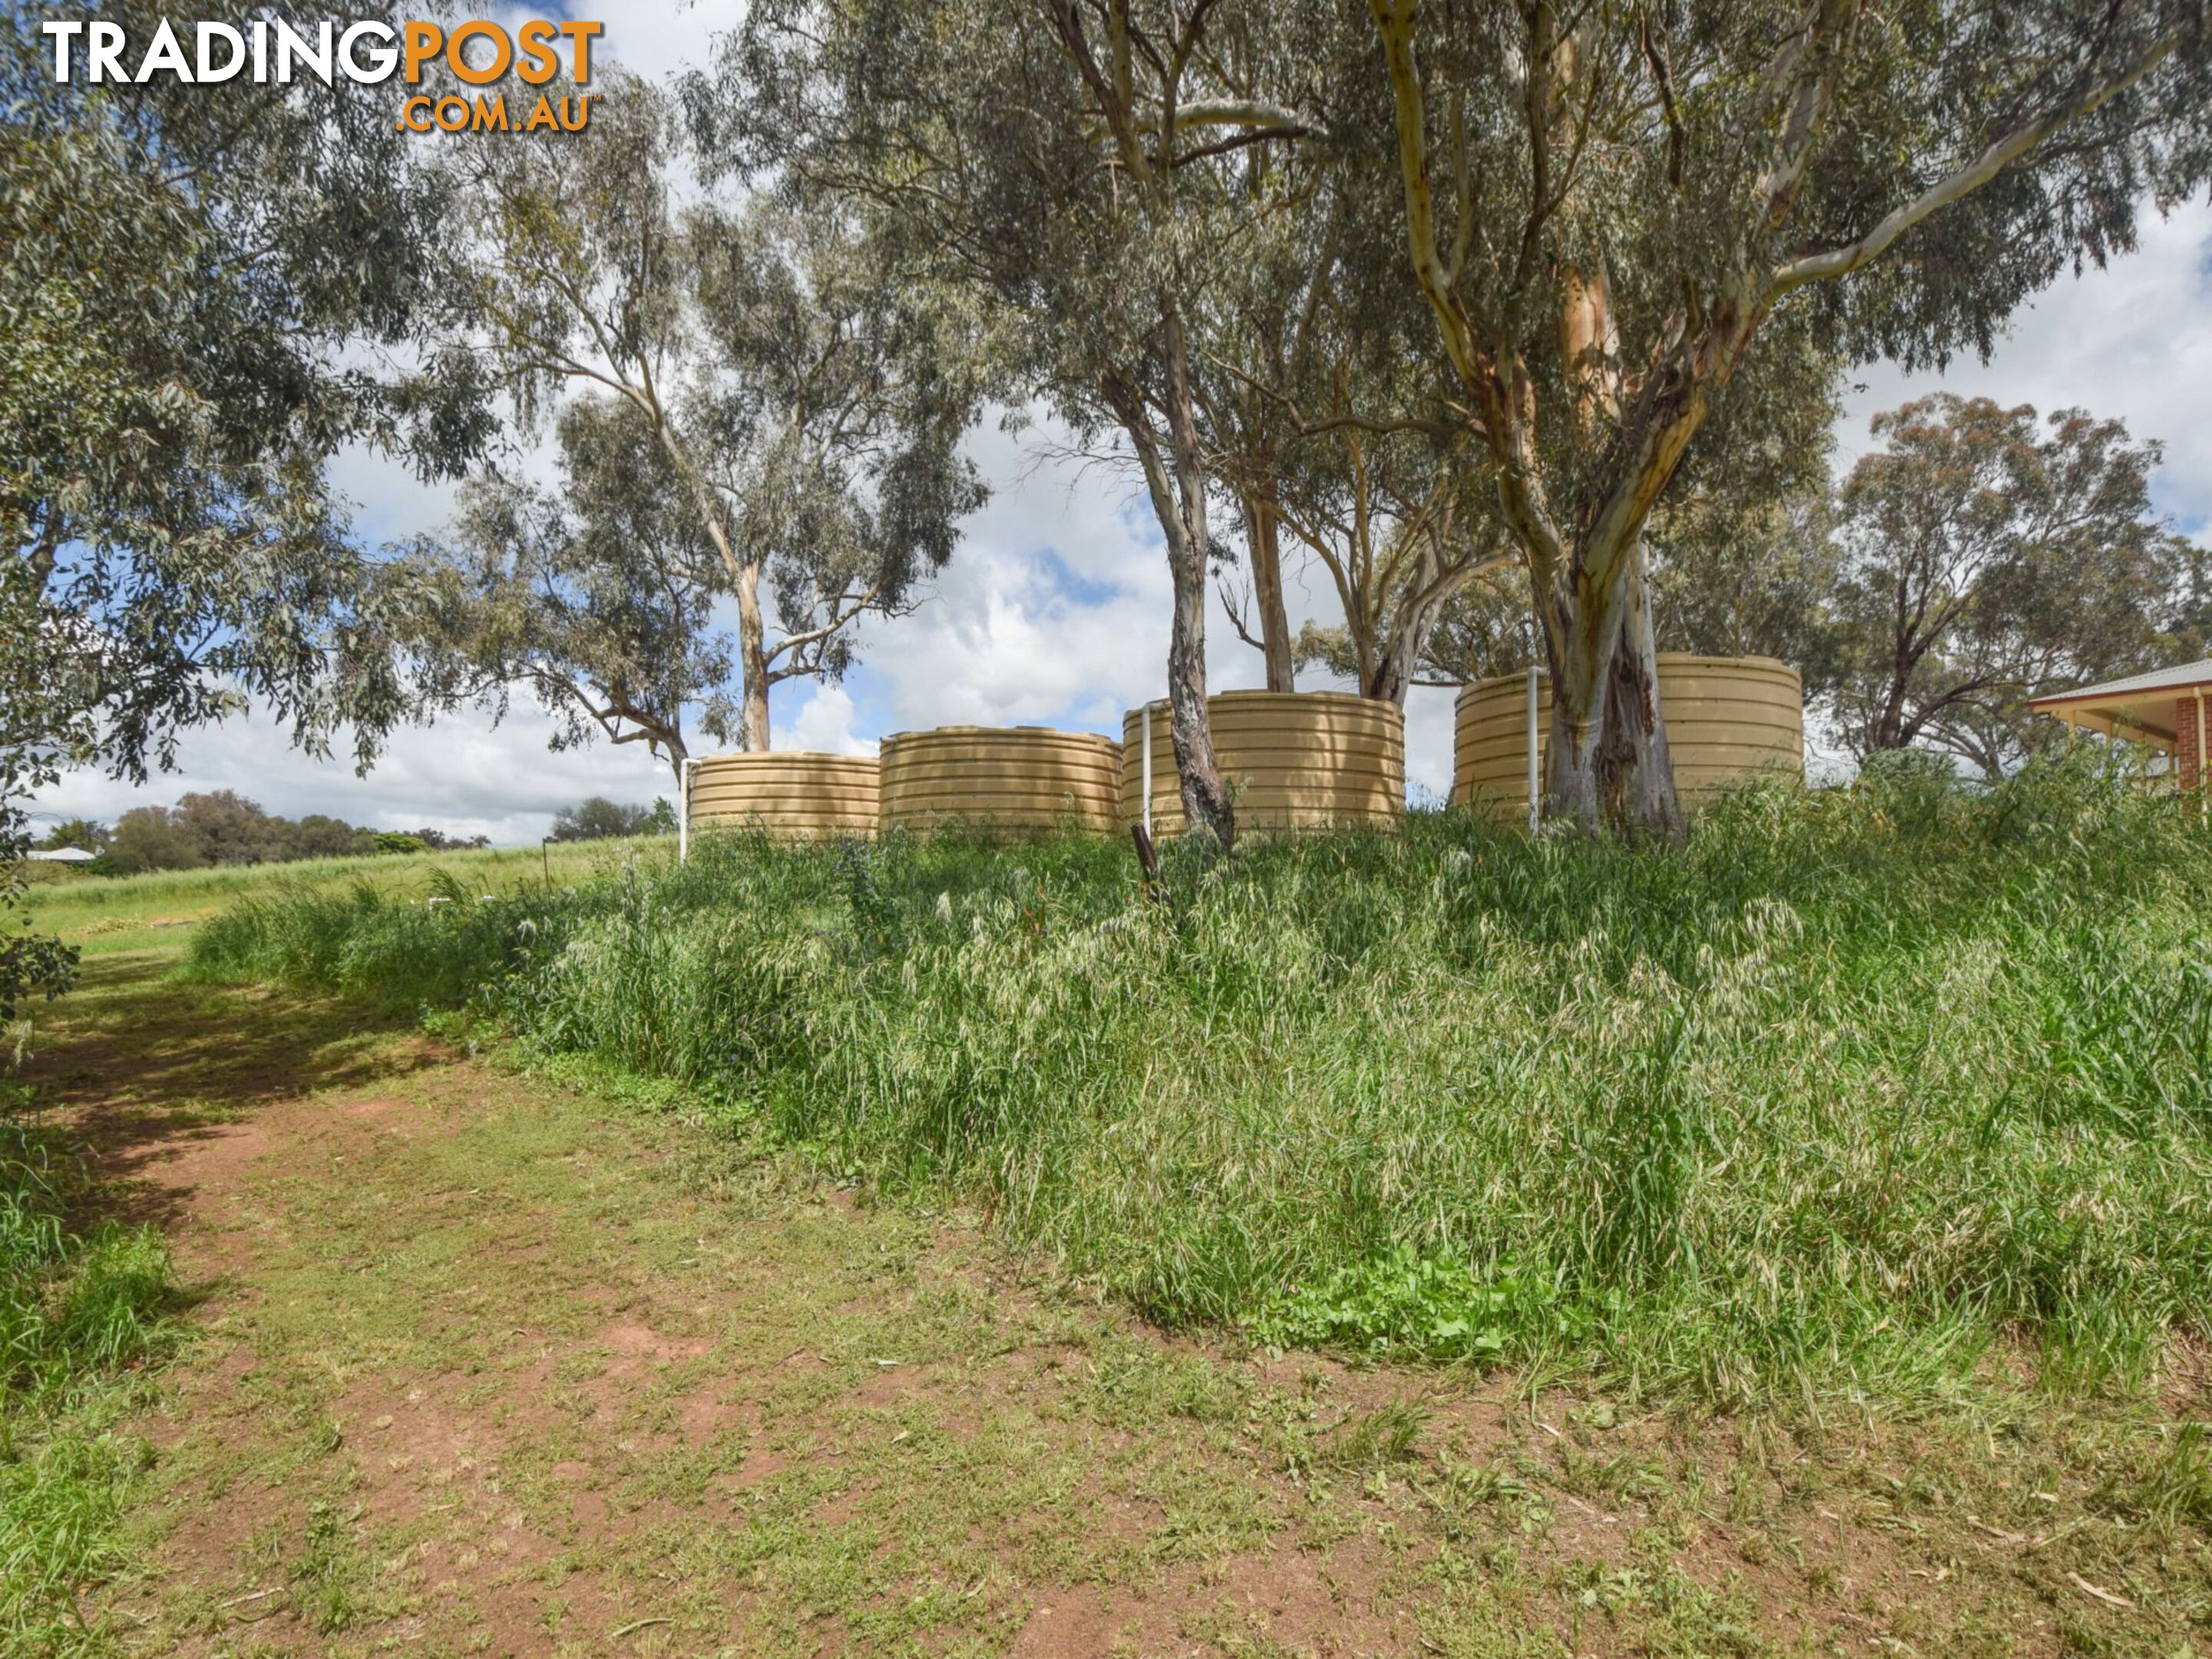 39 Malvicinos Road YOUNG NSW 2594